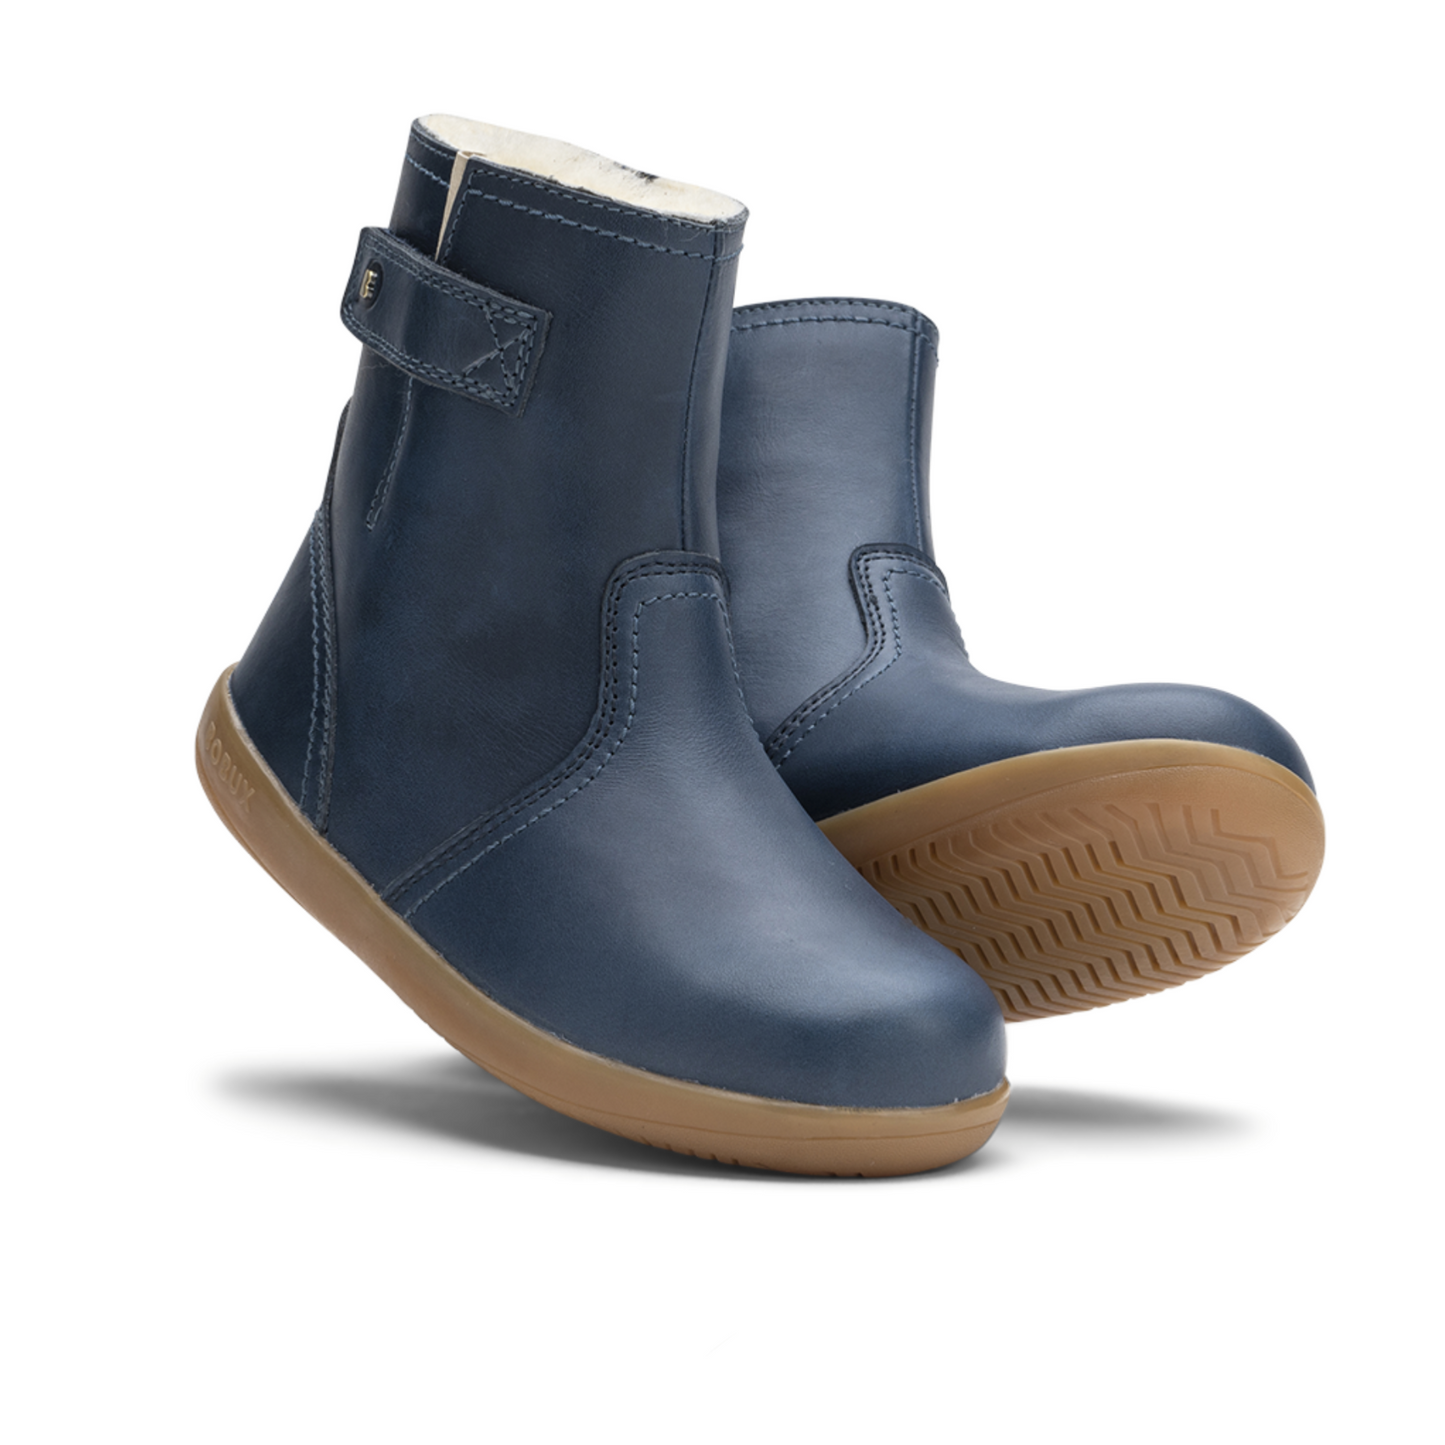 Bobux Tahoe Arctic Midnight Lined Boots